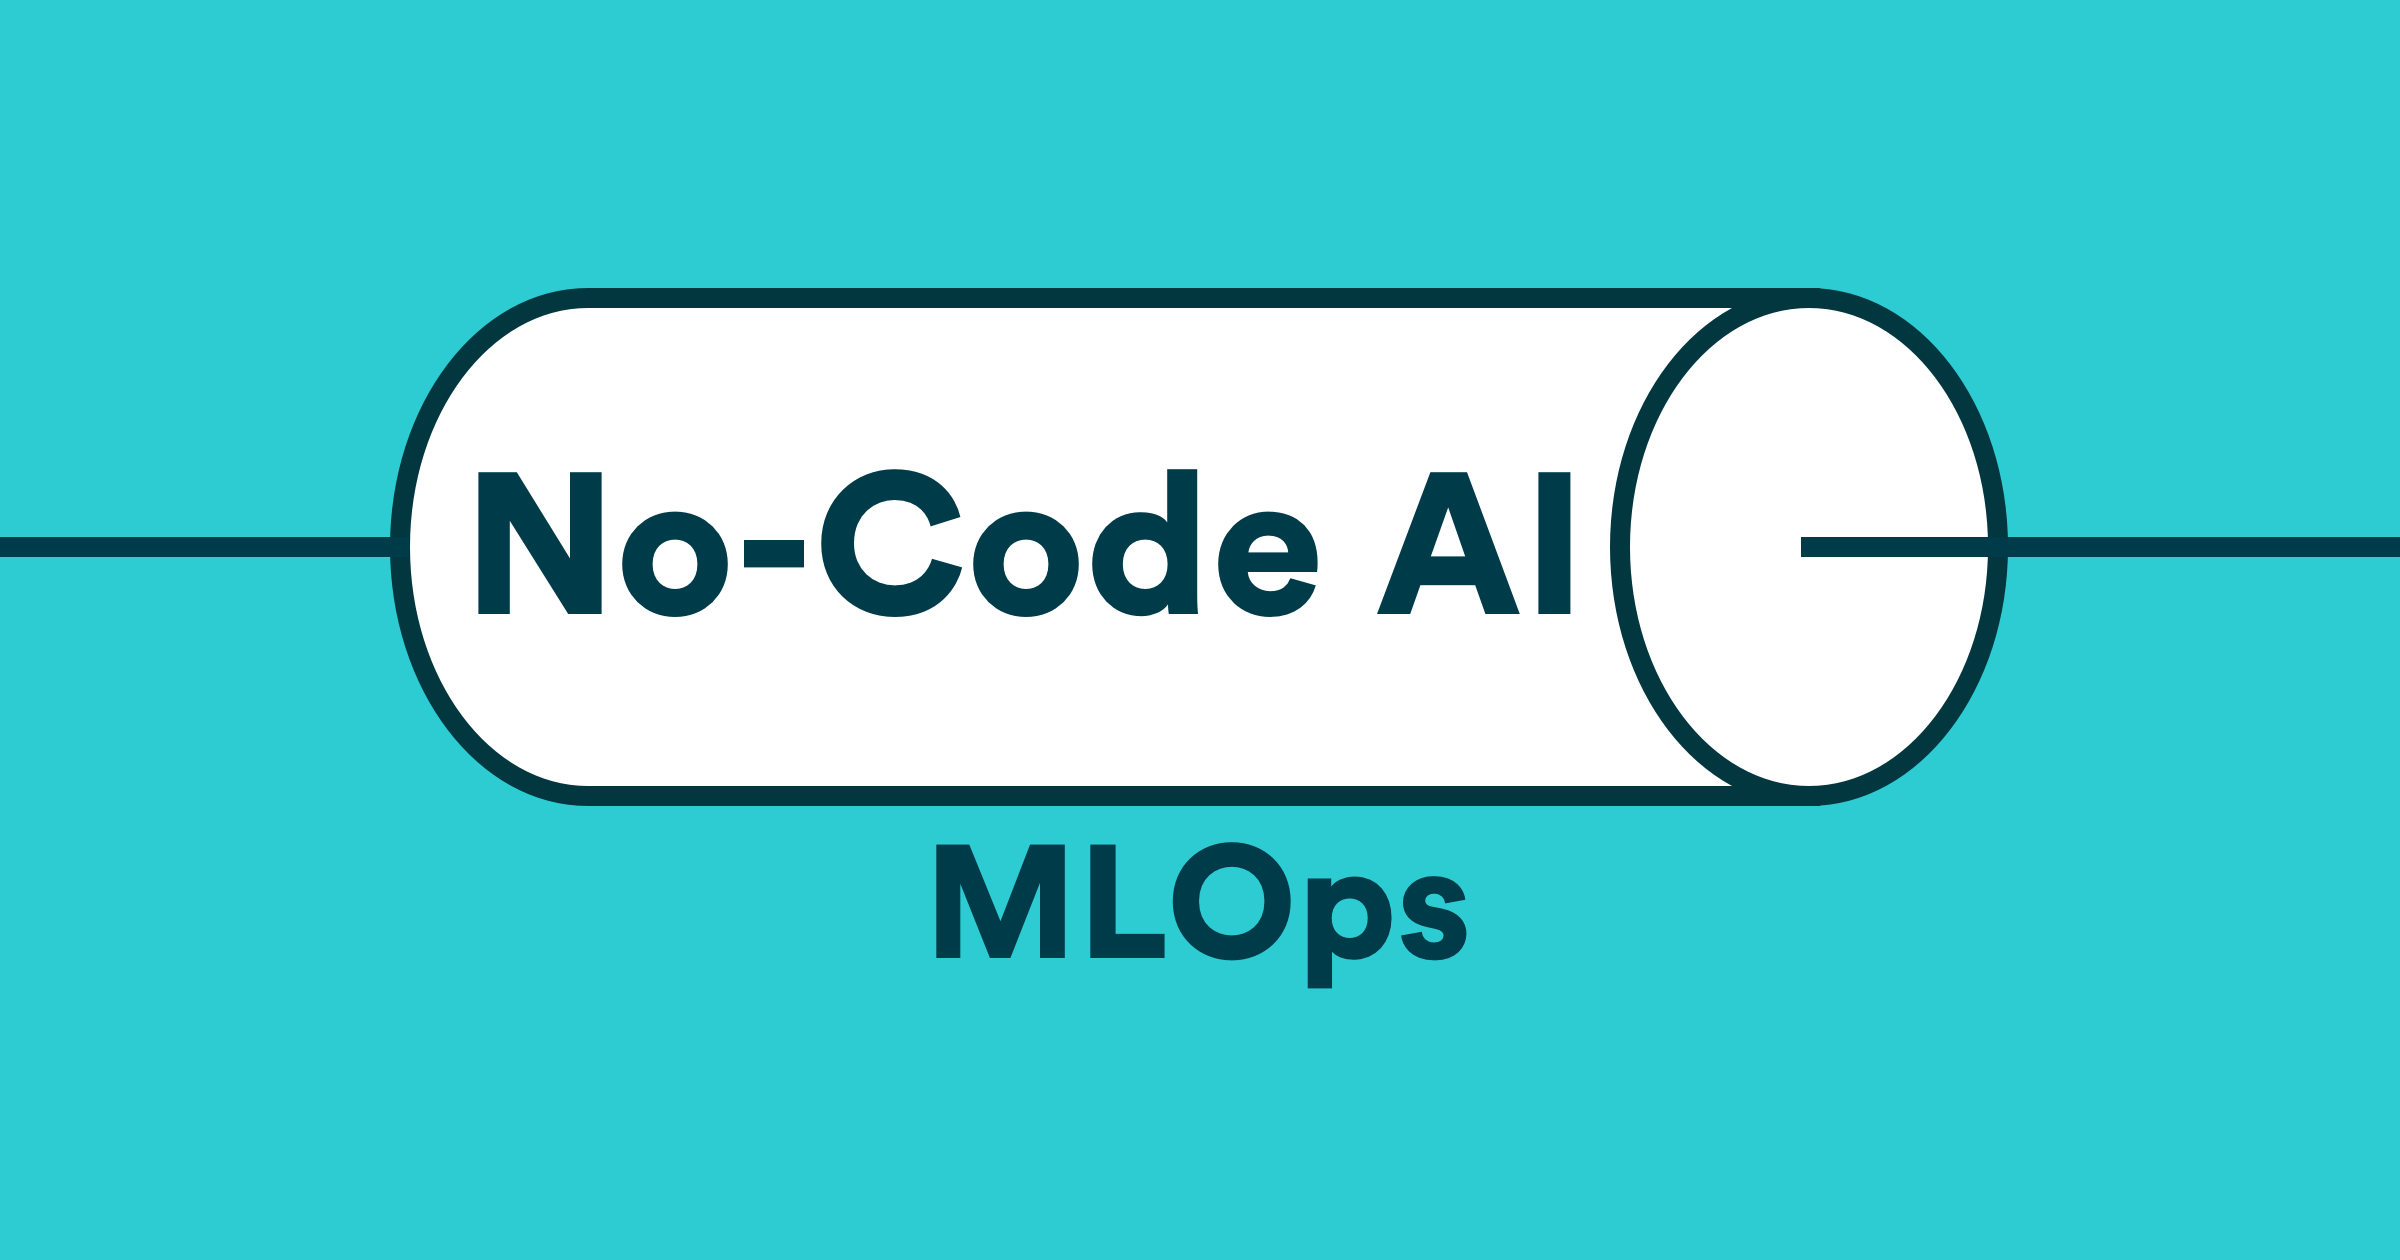 No-code AI and MLOps: No-code AI is only no-code for the end user